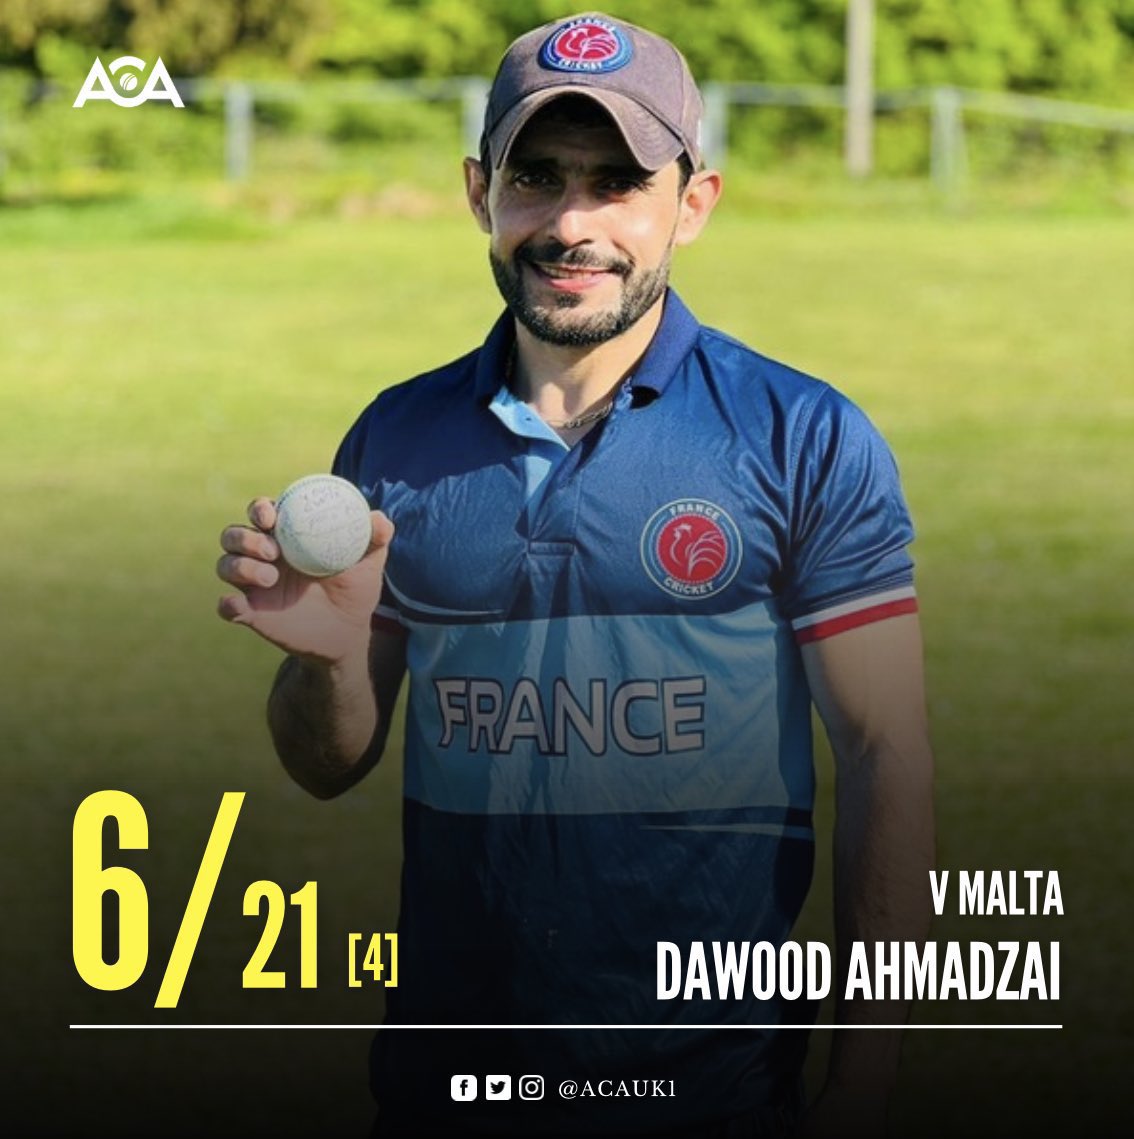 During the thrilling MdinaCup match against Malta, our very own @DawoodAhmadzai_, the France national team player of Afghan origin, displayed his remarkable skills and took an impressive tally of 6 wickets for the France team. He was awarded PoTM. Congratulations, Dawood Jana! 👏🏻